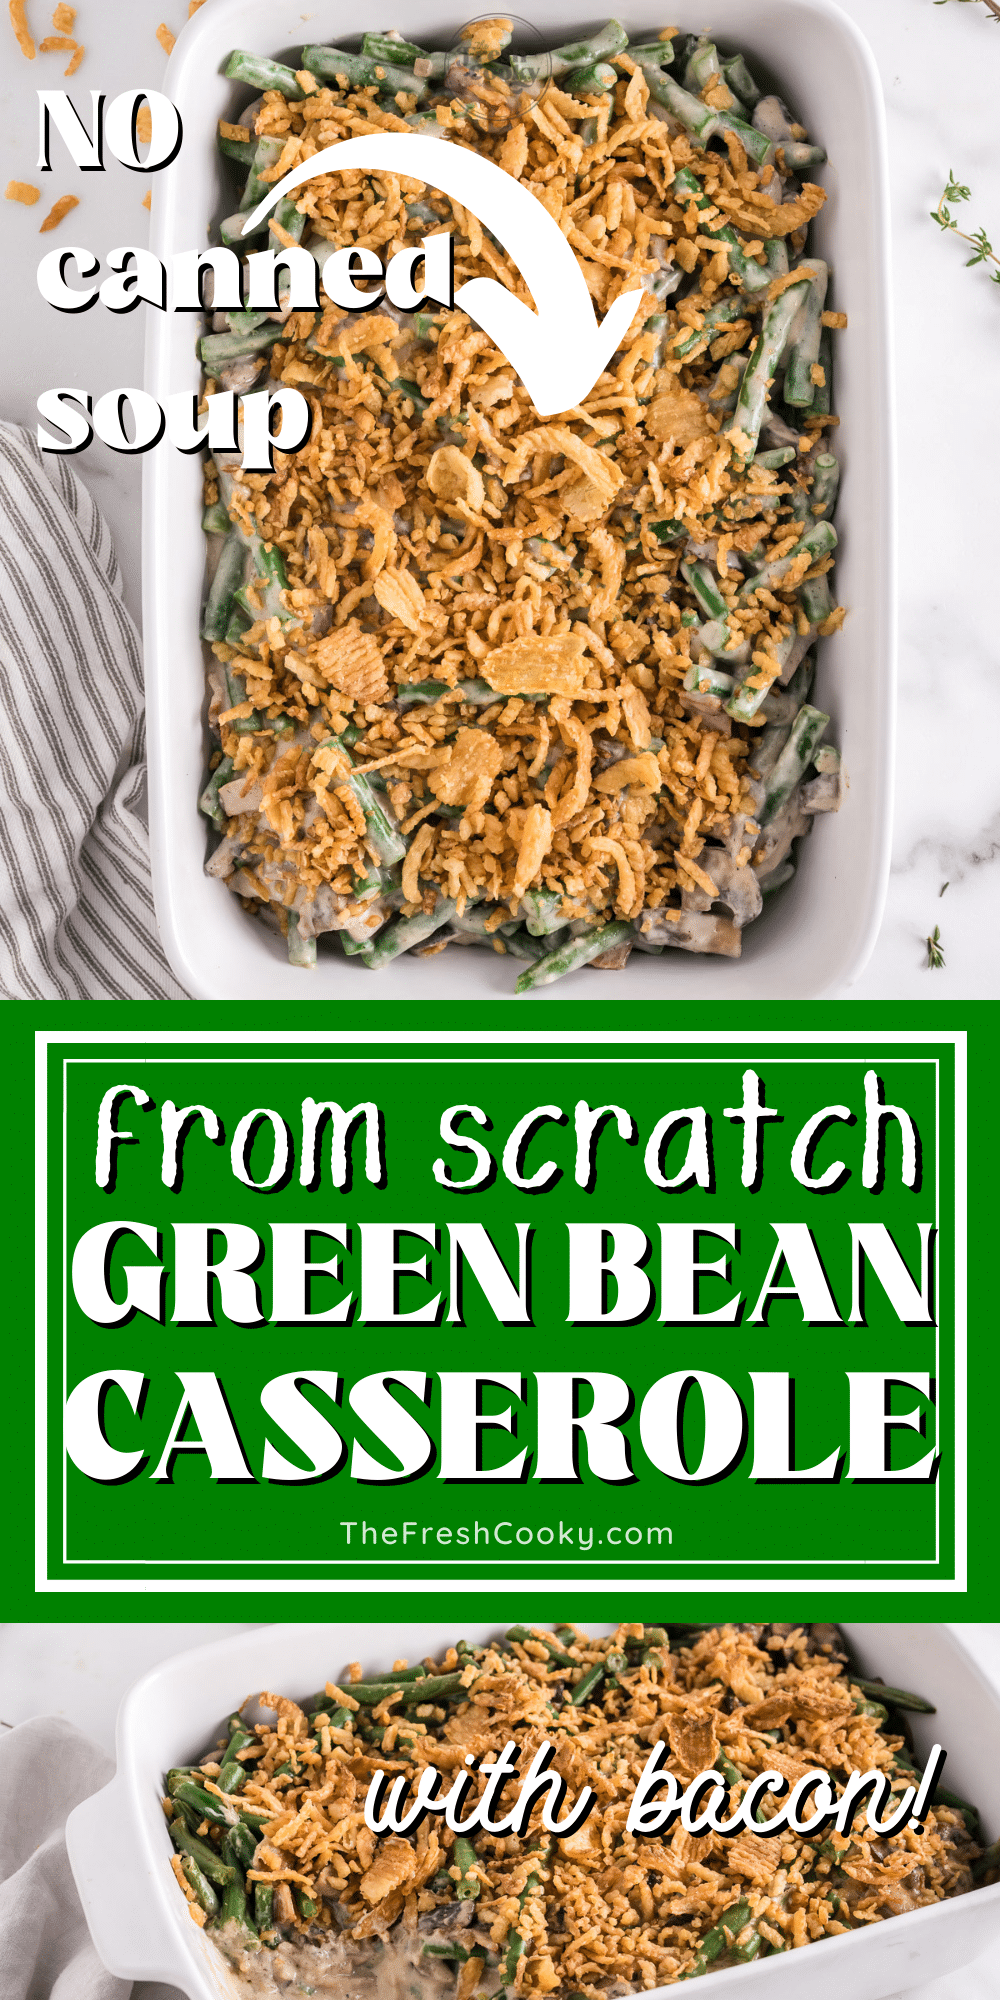 Ultimate green bean casserole from scratch with fried onions and no canned soup, to pin.